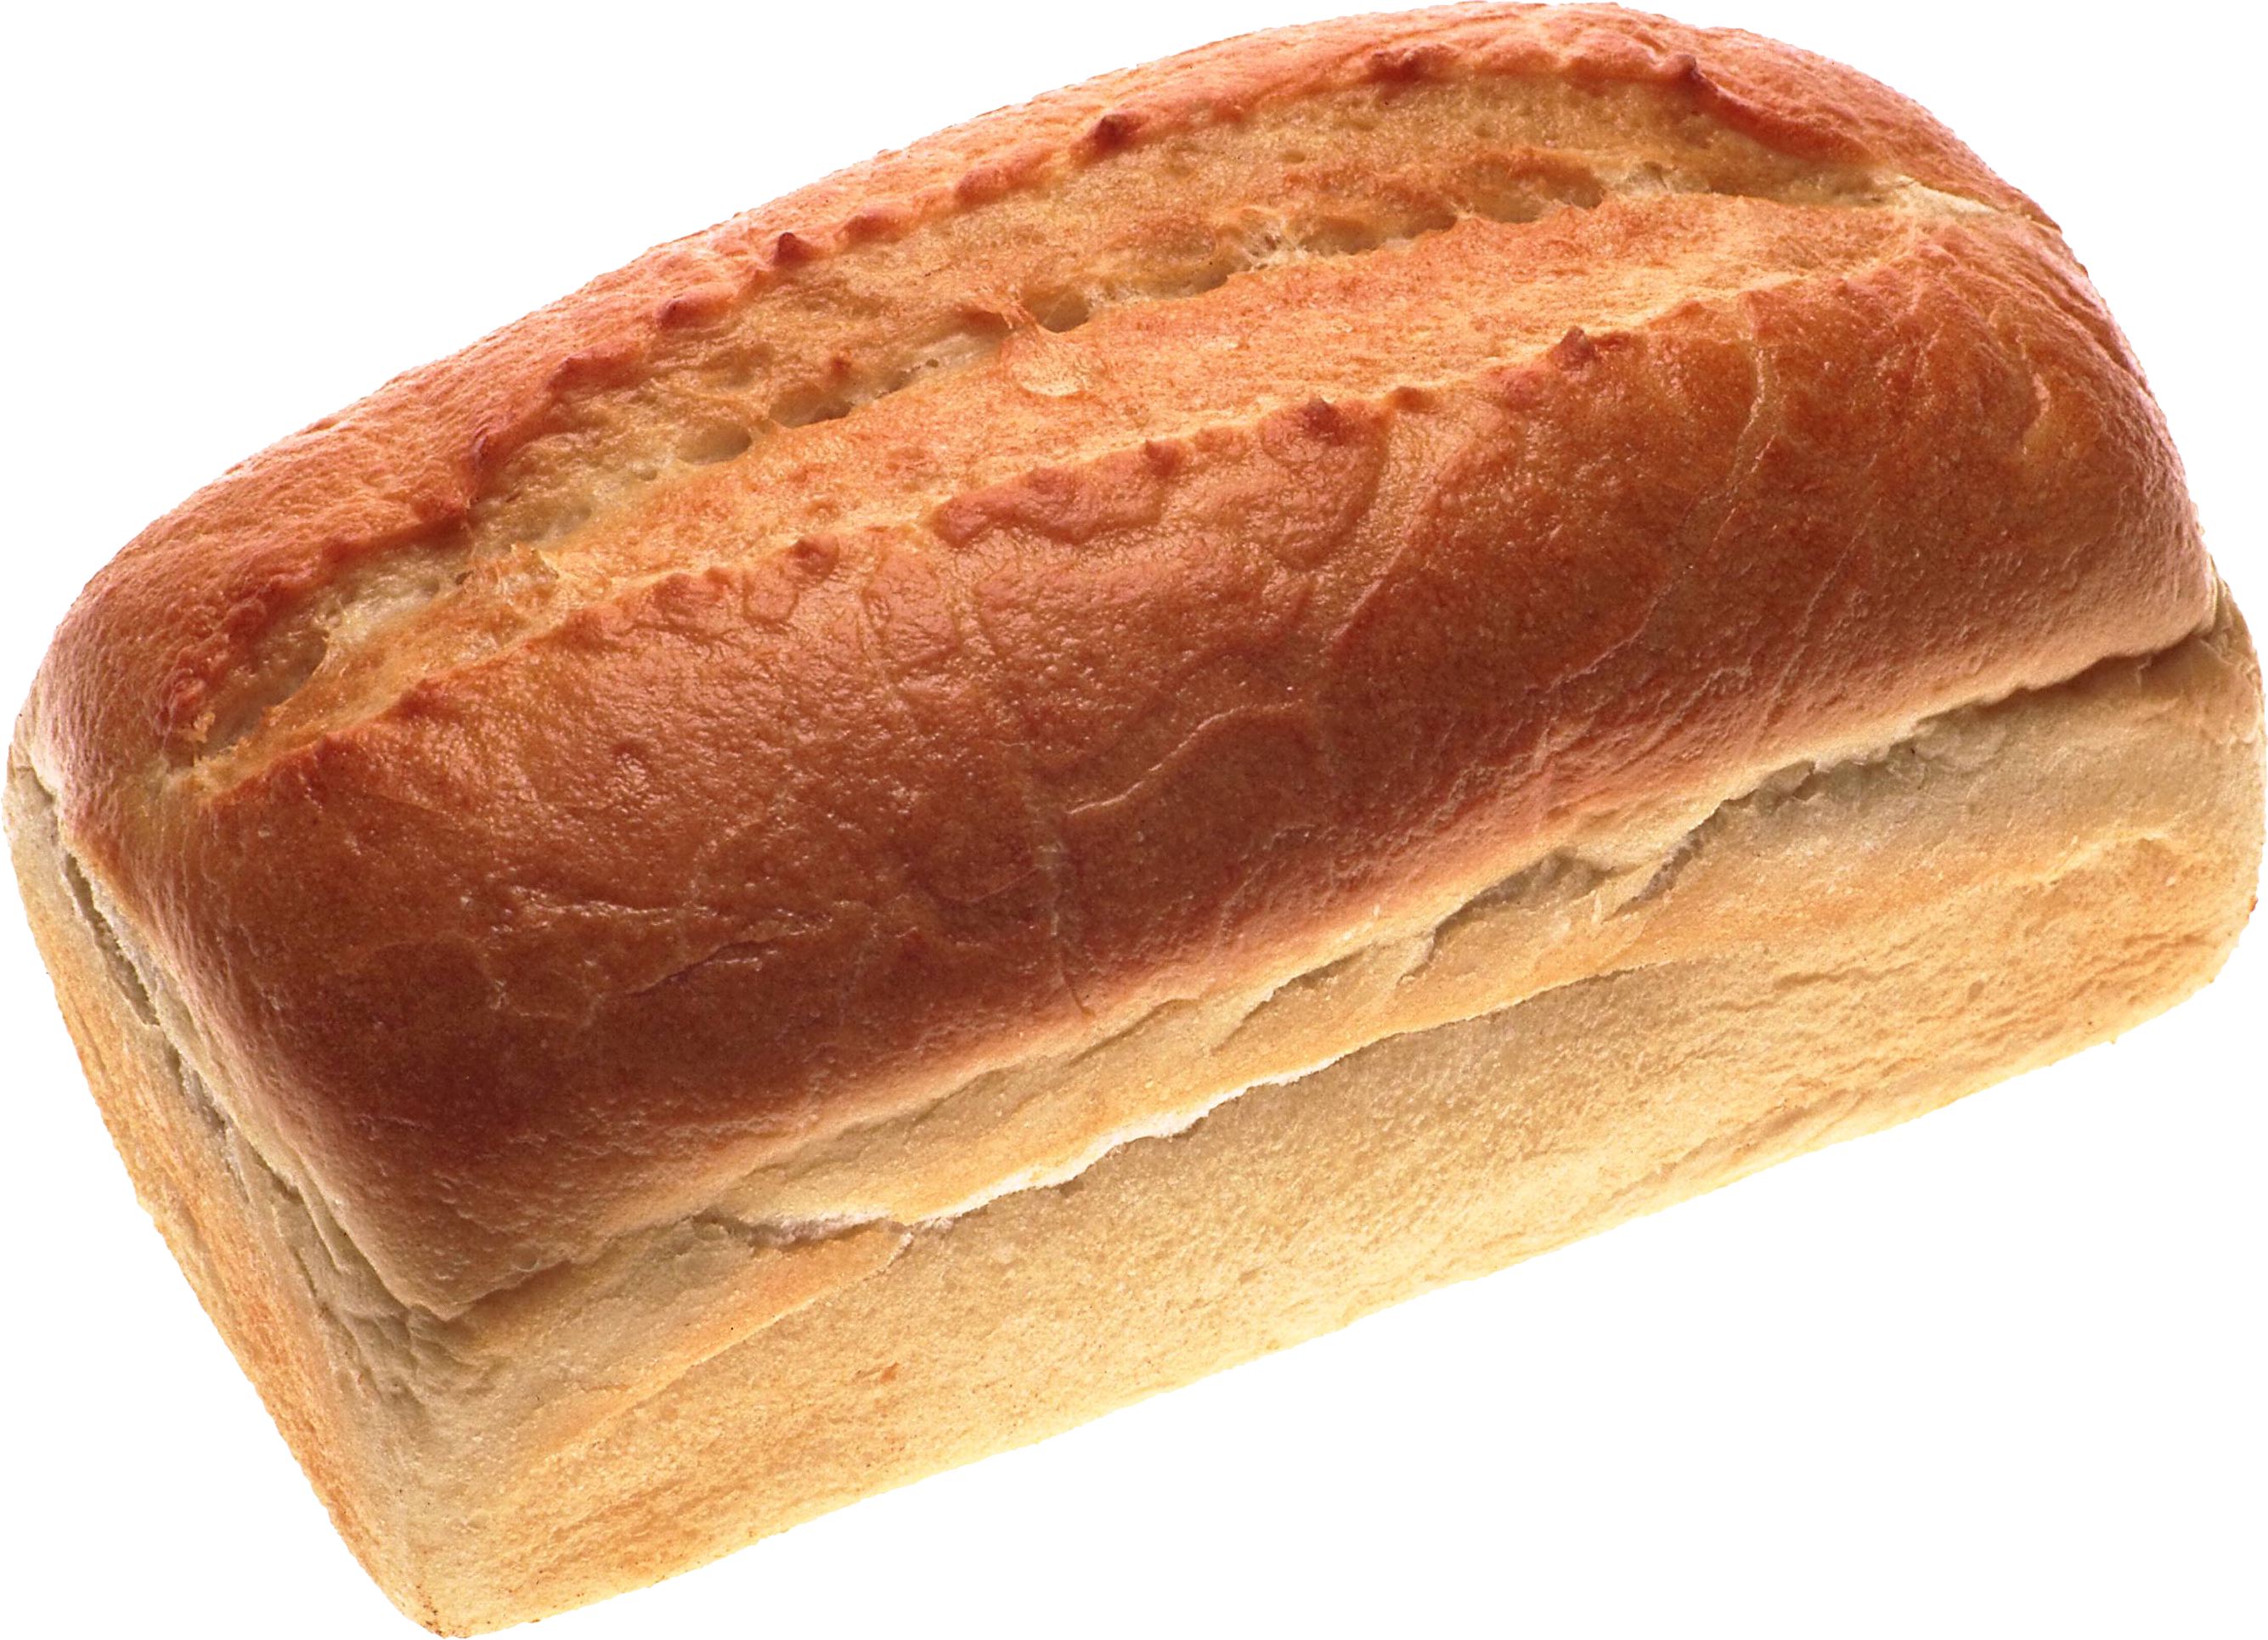 Bread Png Image - Bread, Transparent background PNG HD thumbnail